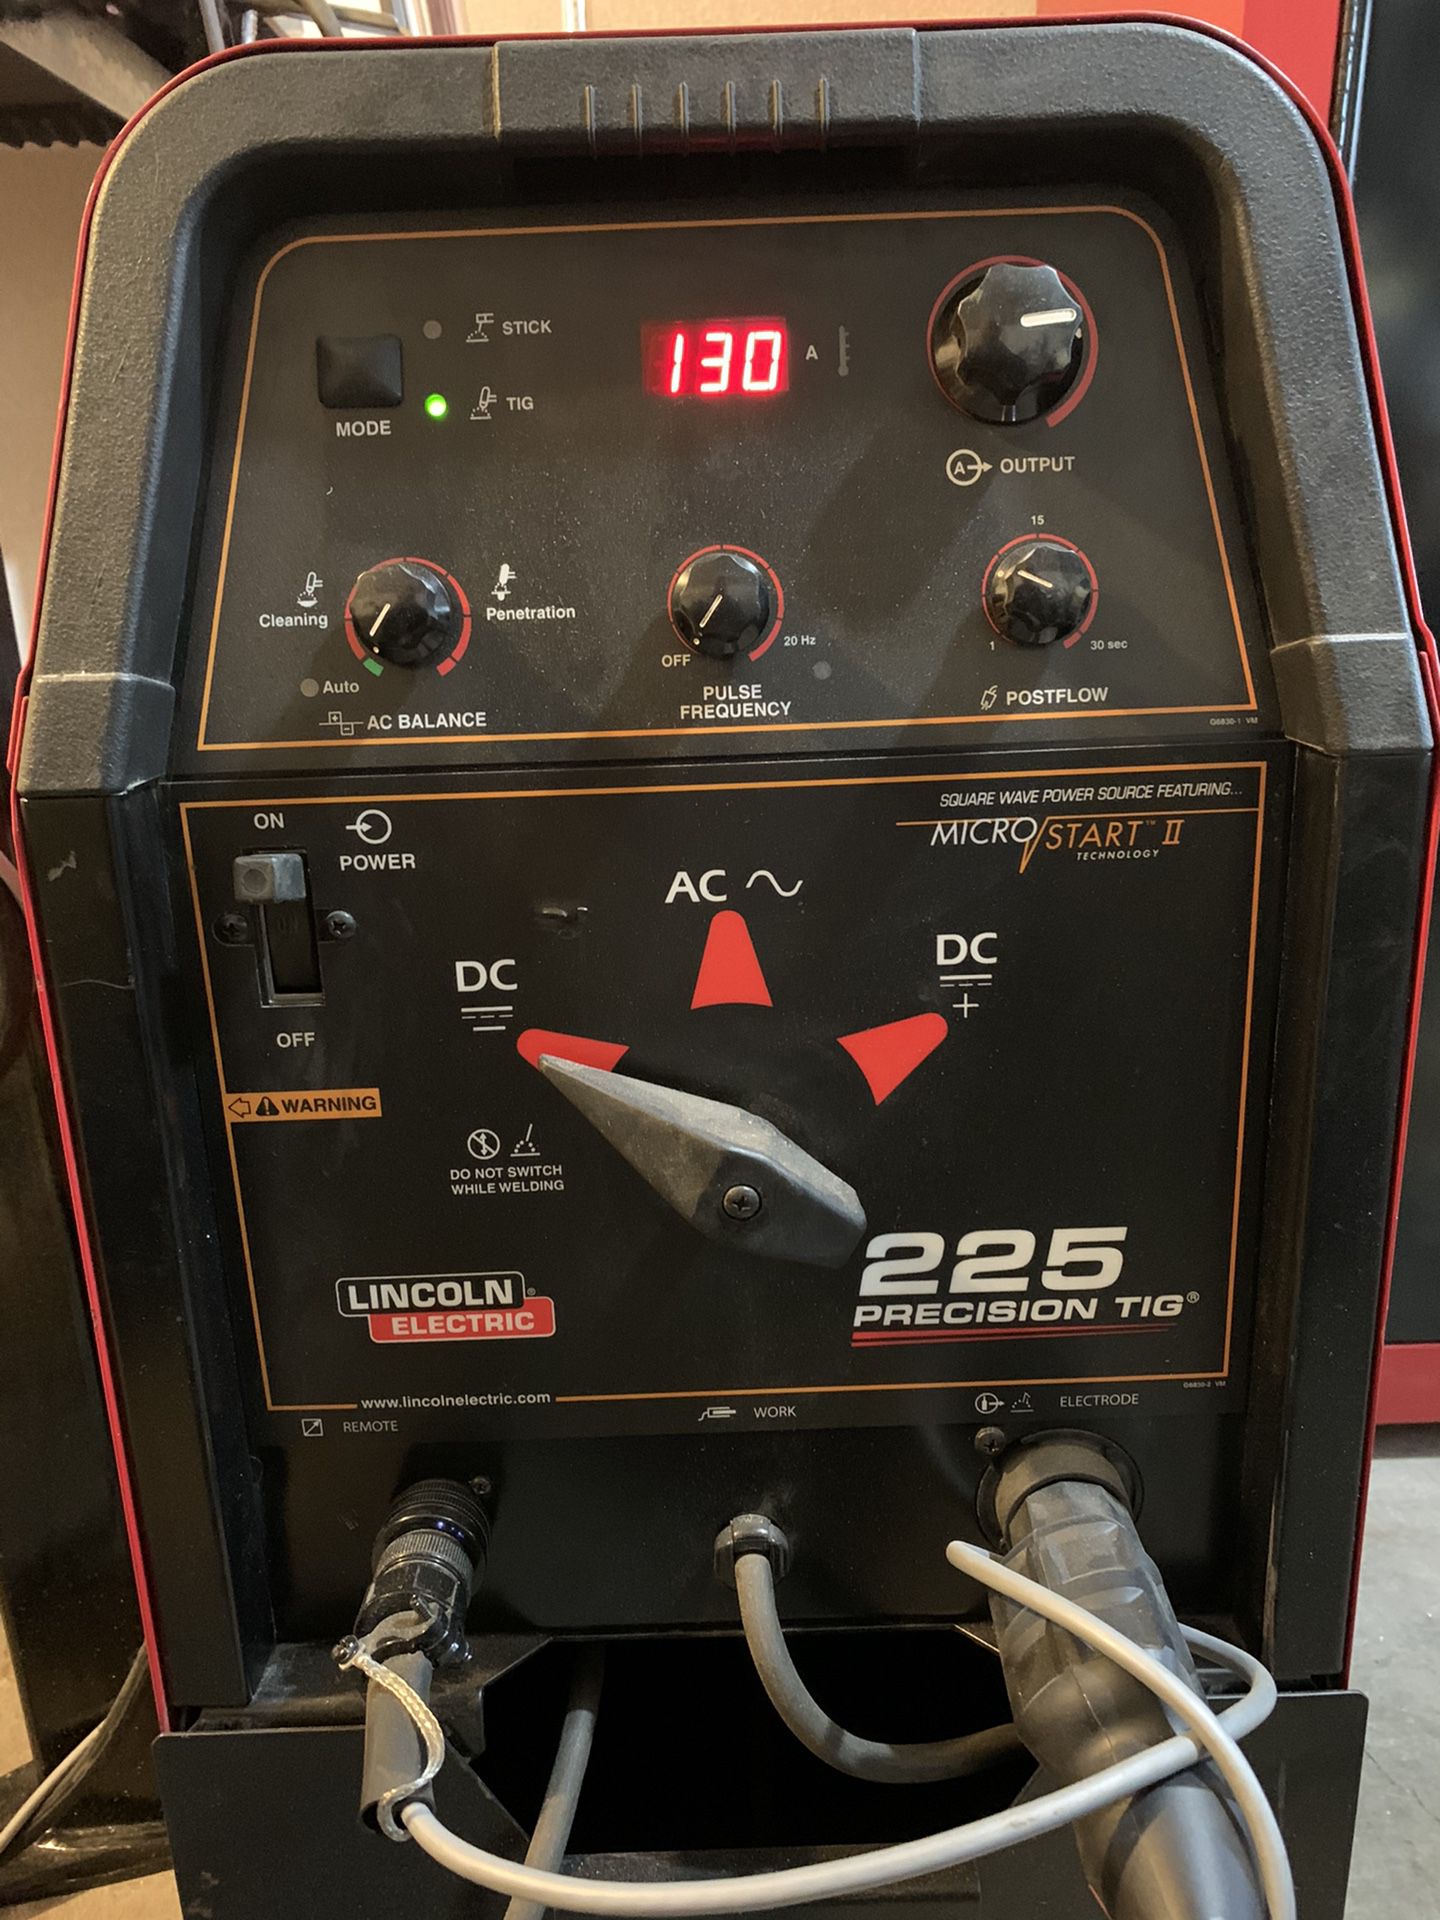 Lincoln Precision Tig 225 Welder With Hand Amptrol For Sale In Puyallup